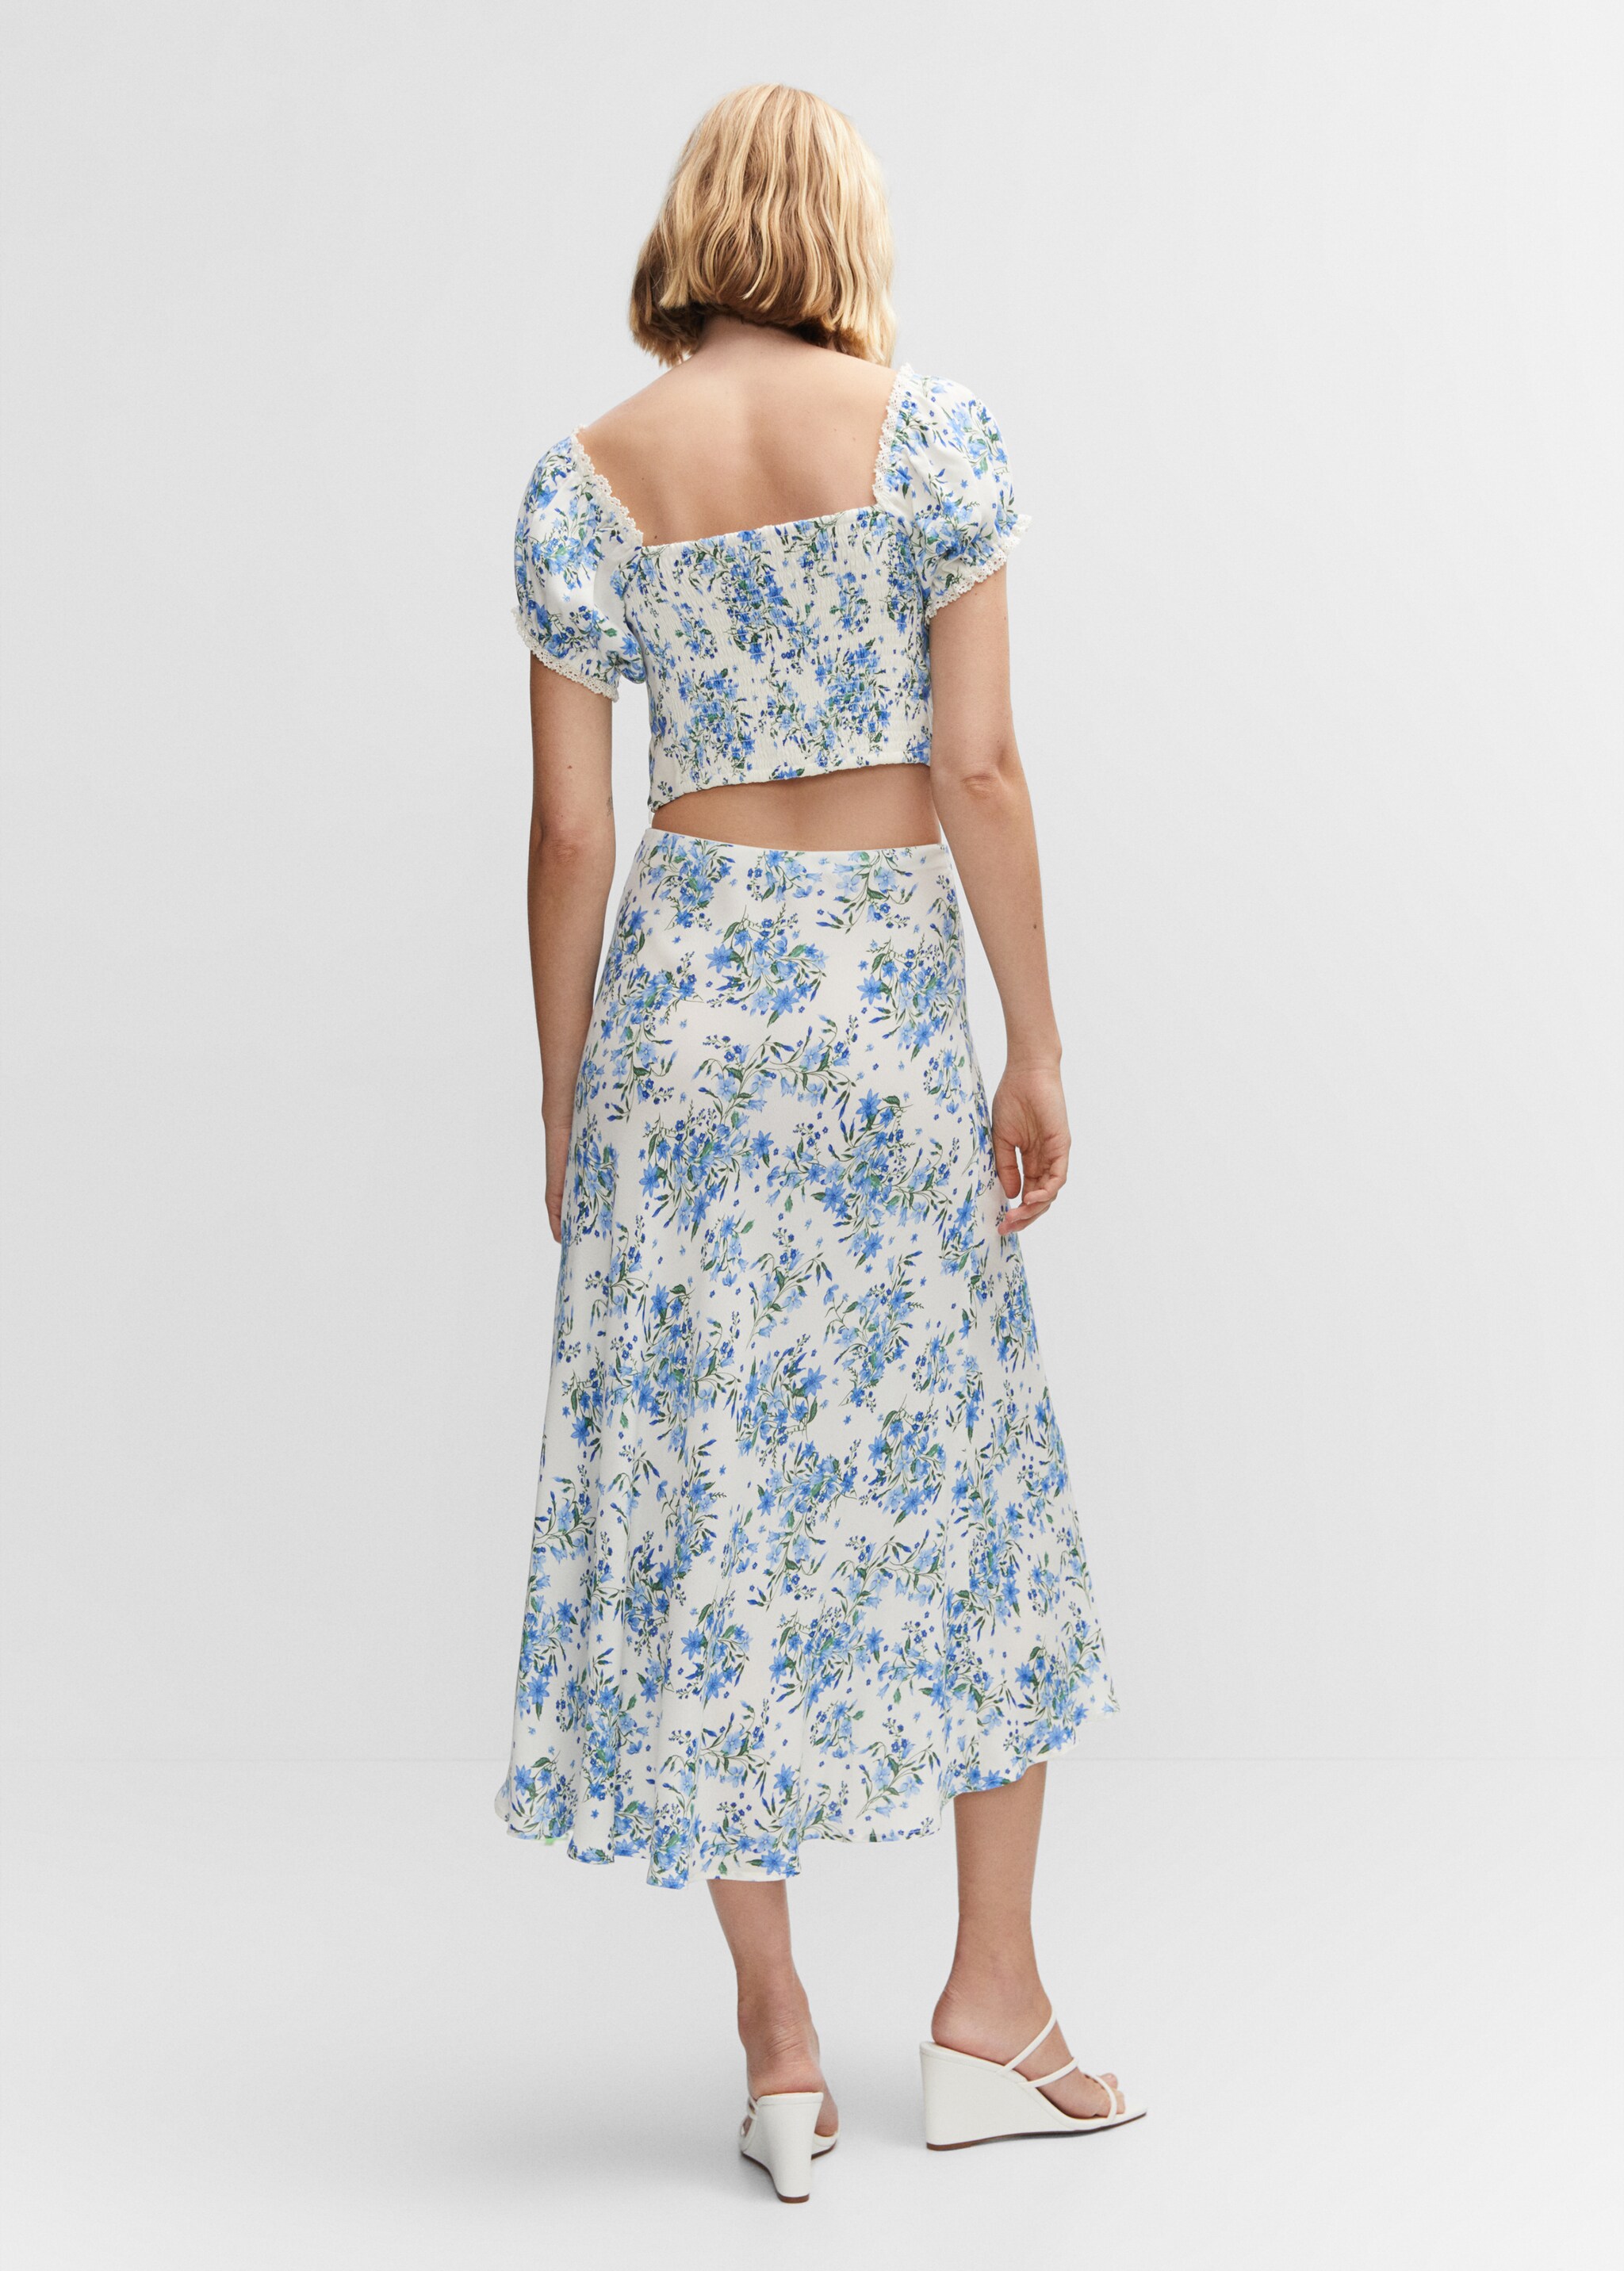 Floral midi skirt - Reverse of the article